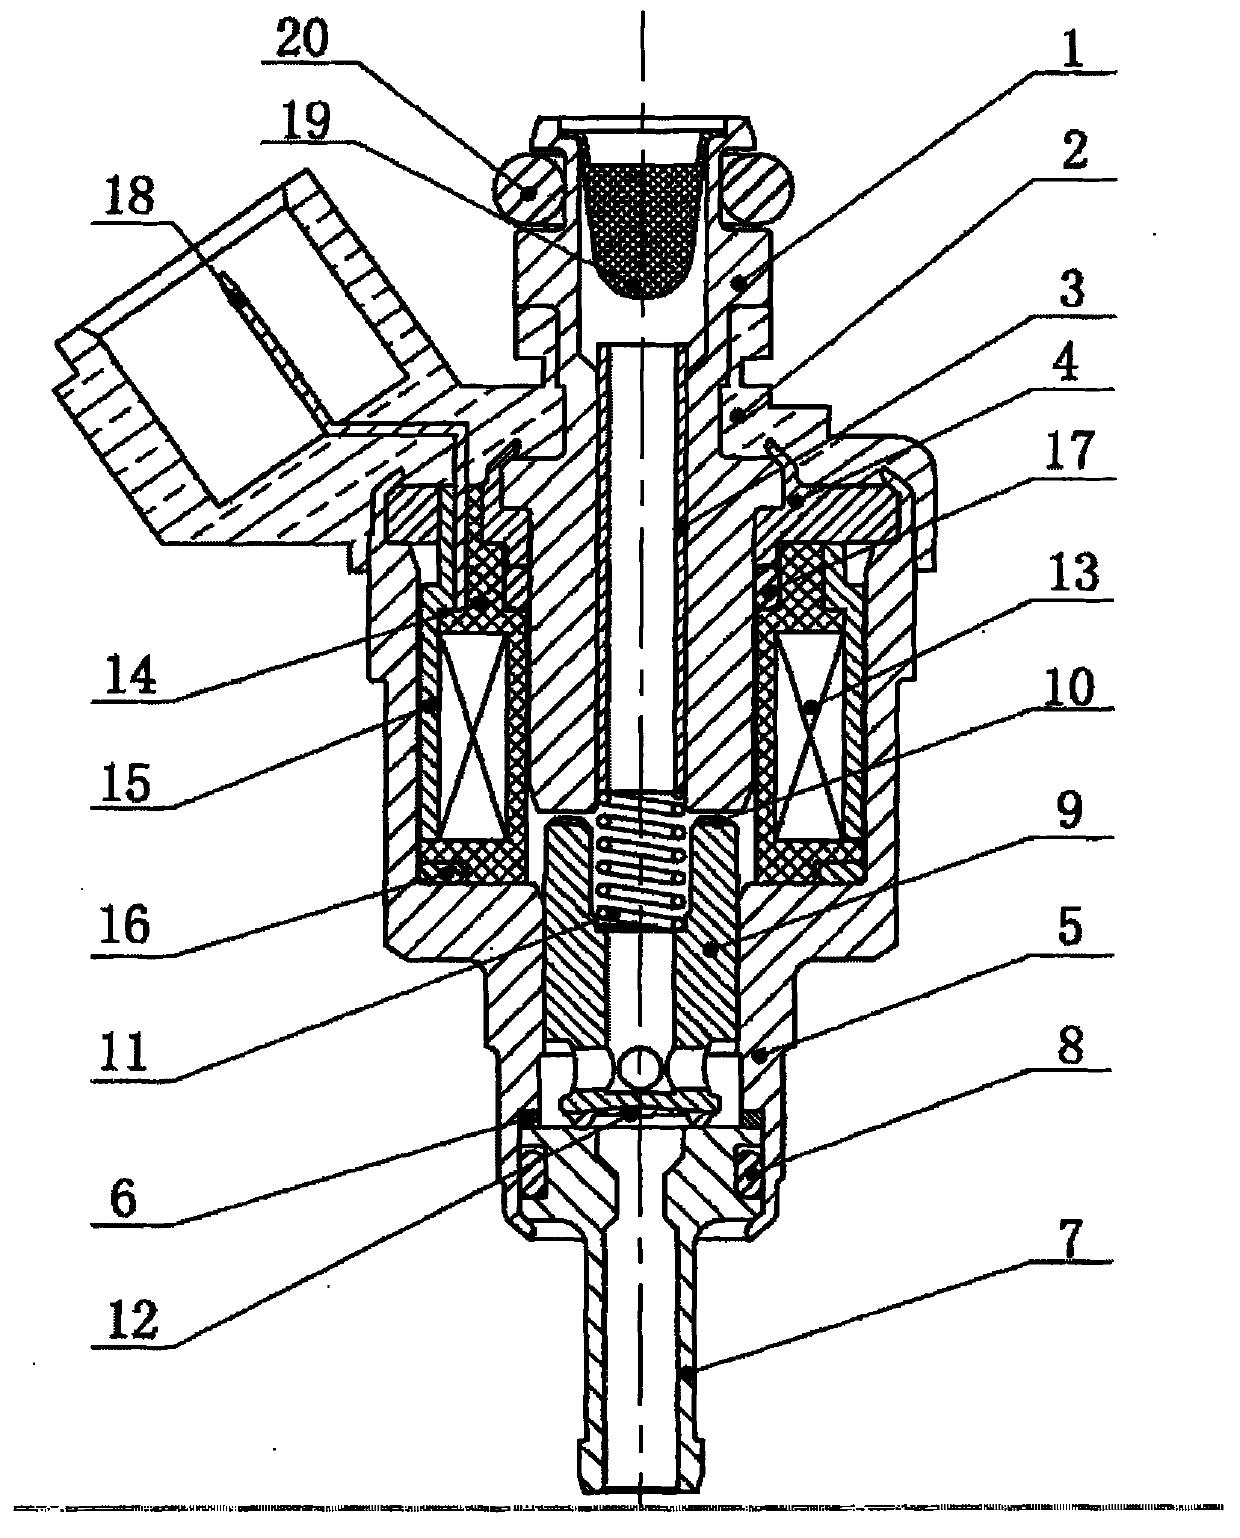 High-speed fuel gas injection electromagnetic valve for vehicles